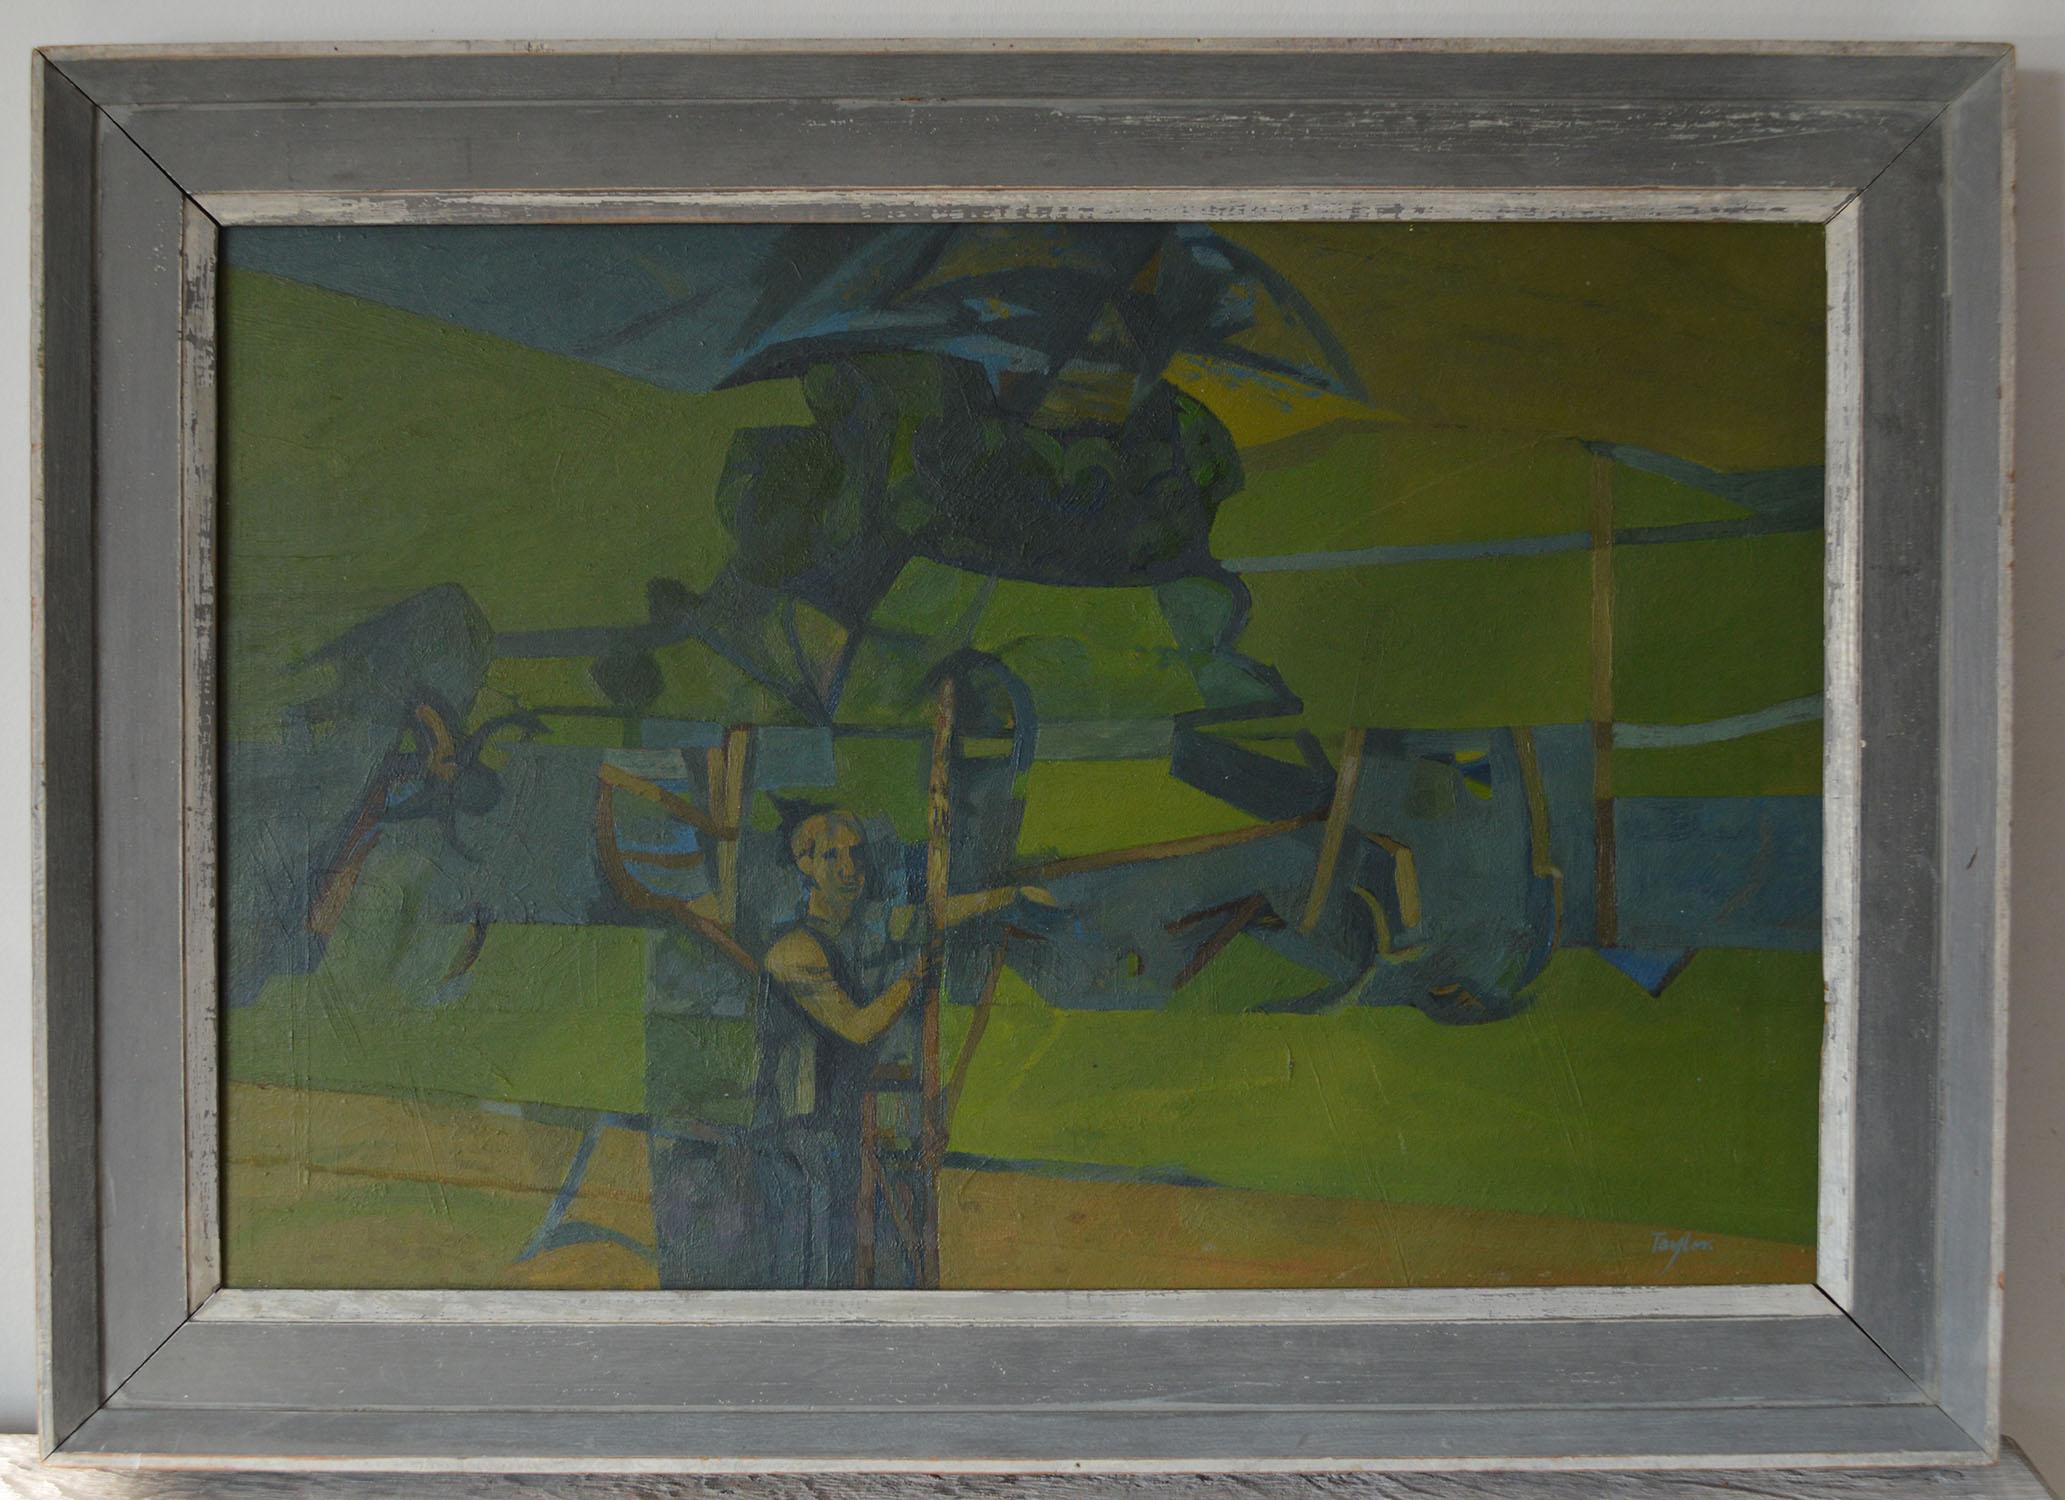 Great painting of a figure in an abstract landscape

By Yorkshire artist A. C. Taylor. In the style of Keith Vaughan.

Wonderful green colors 

Original painted frame

Oil on board.

Signed bottom right

The measurement given below is